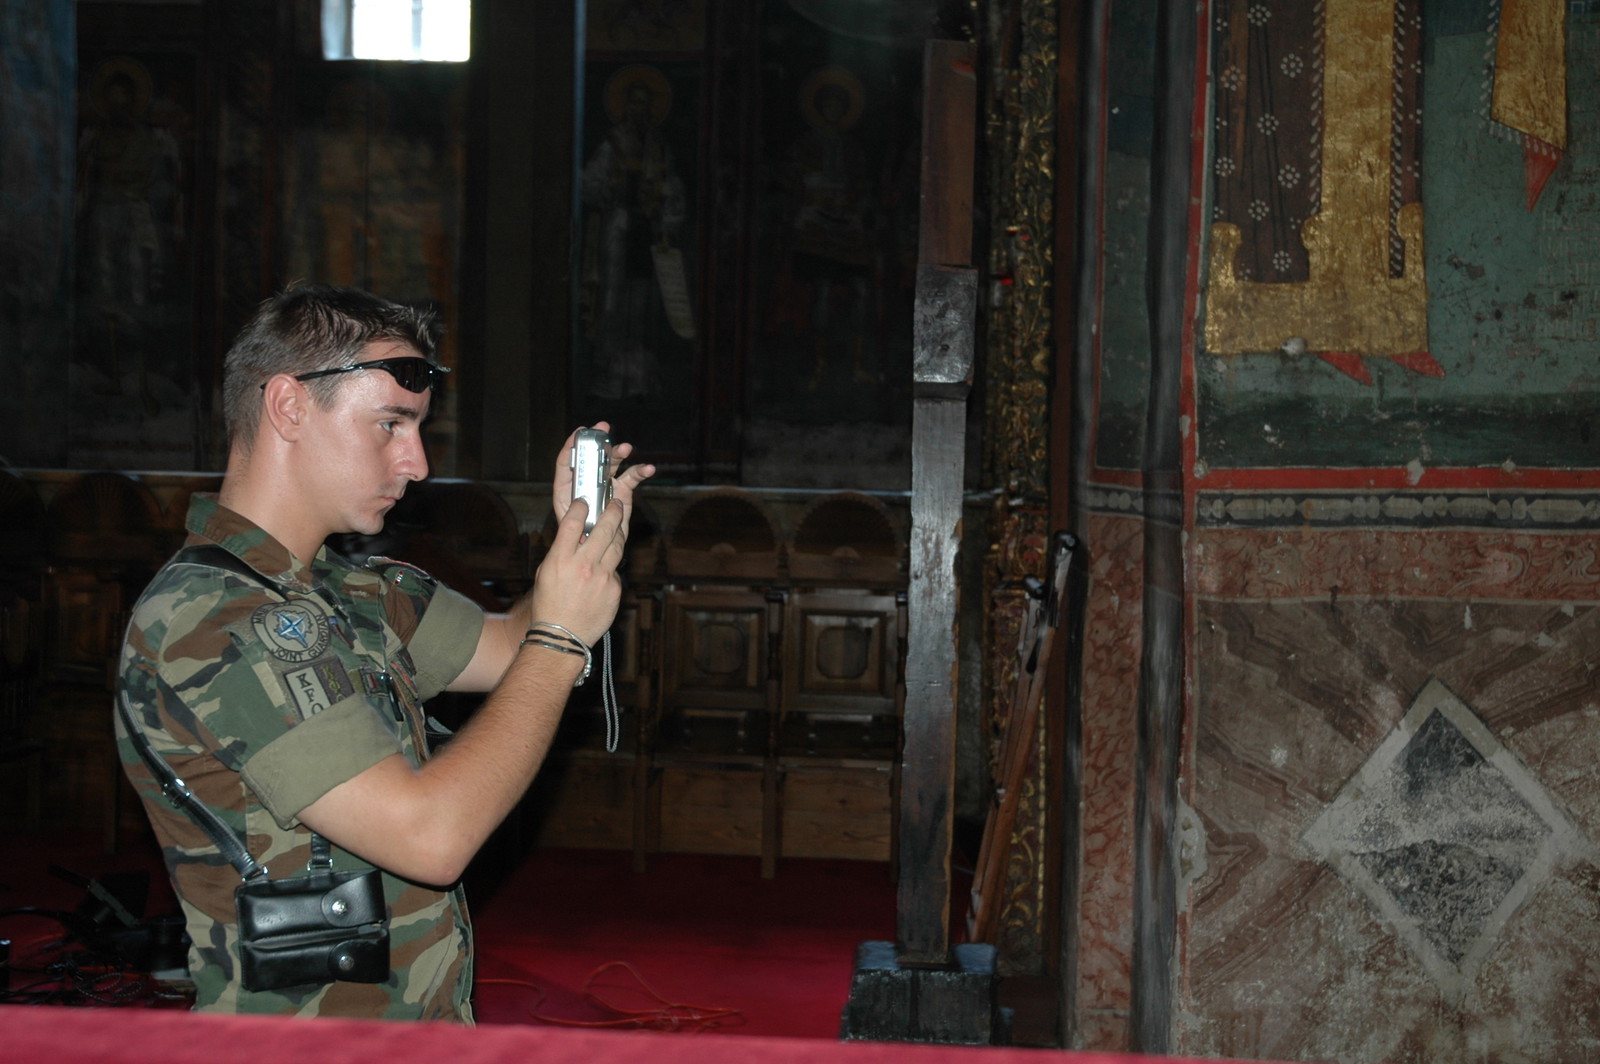 KFOR Soldiers visiting the Monastery 19